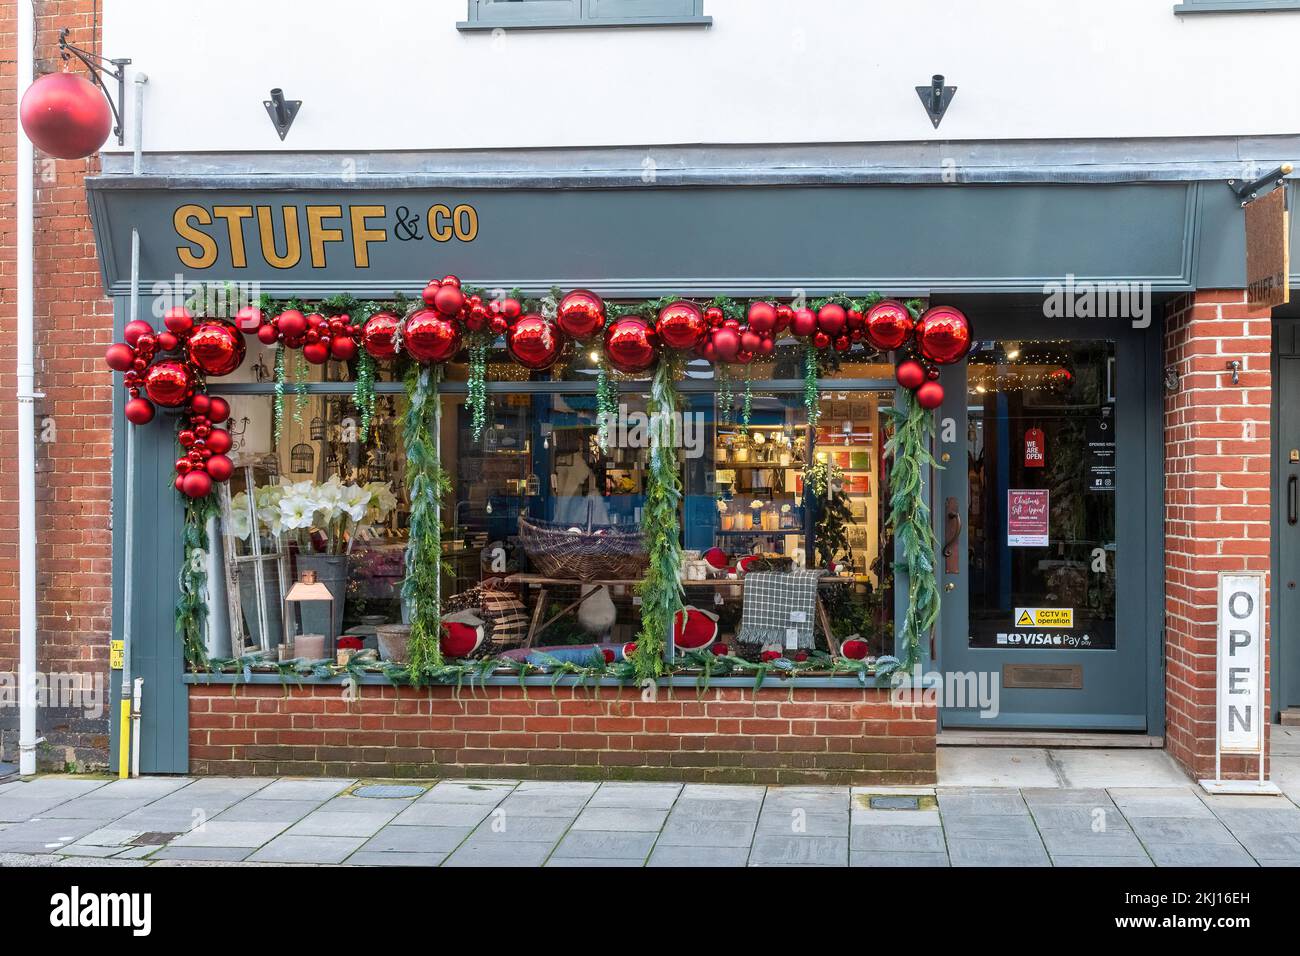 Stuff & Co, independent gift shop business in Midhurst town with red Christmas baubles and decorations, West Sussex, England, UK Stock Photo